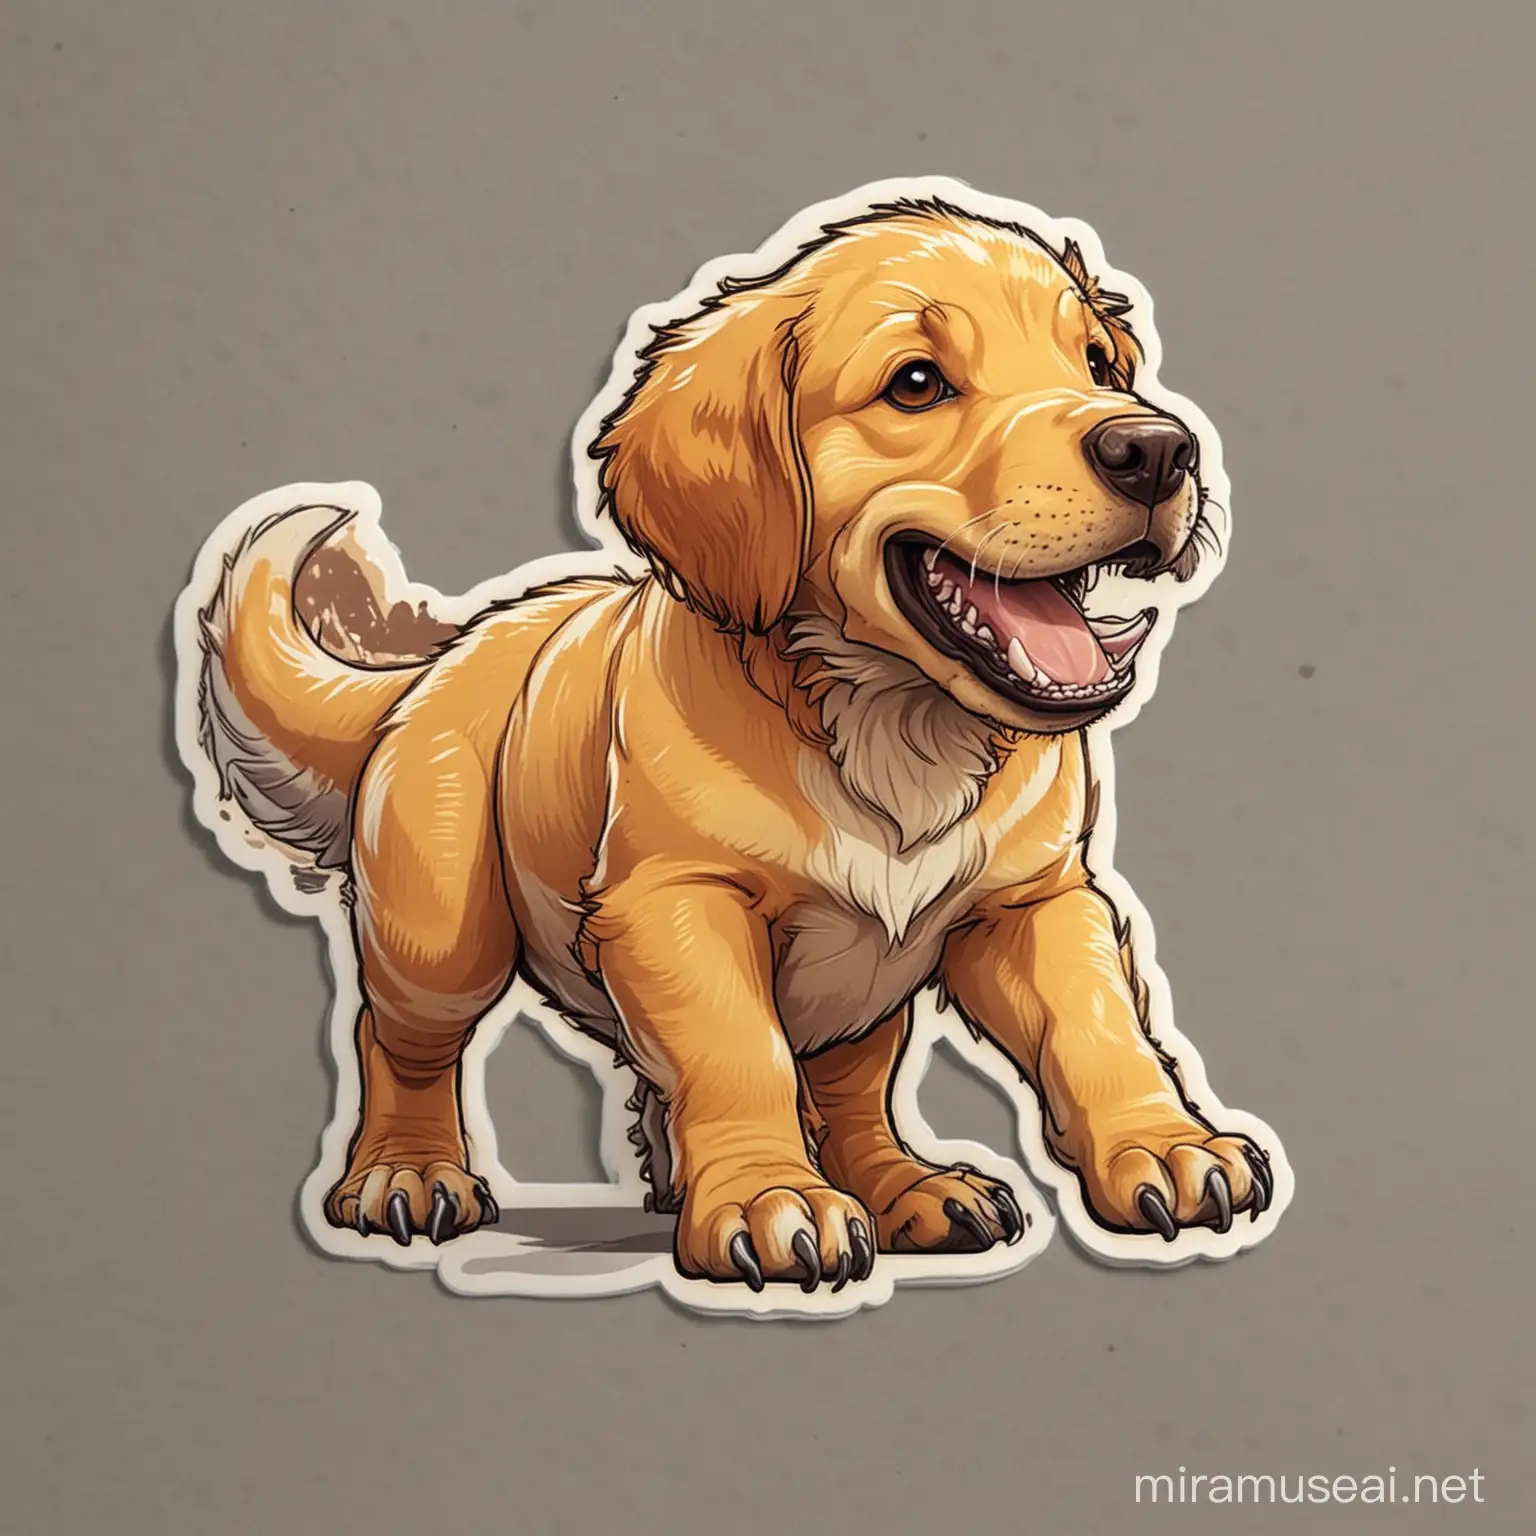 A sticker, a Tyrannosaurus rex mixed with a golden retriever puppy, thick lines, low detail, no shading -- ar 9:11 --v5